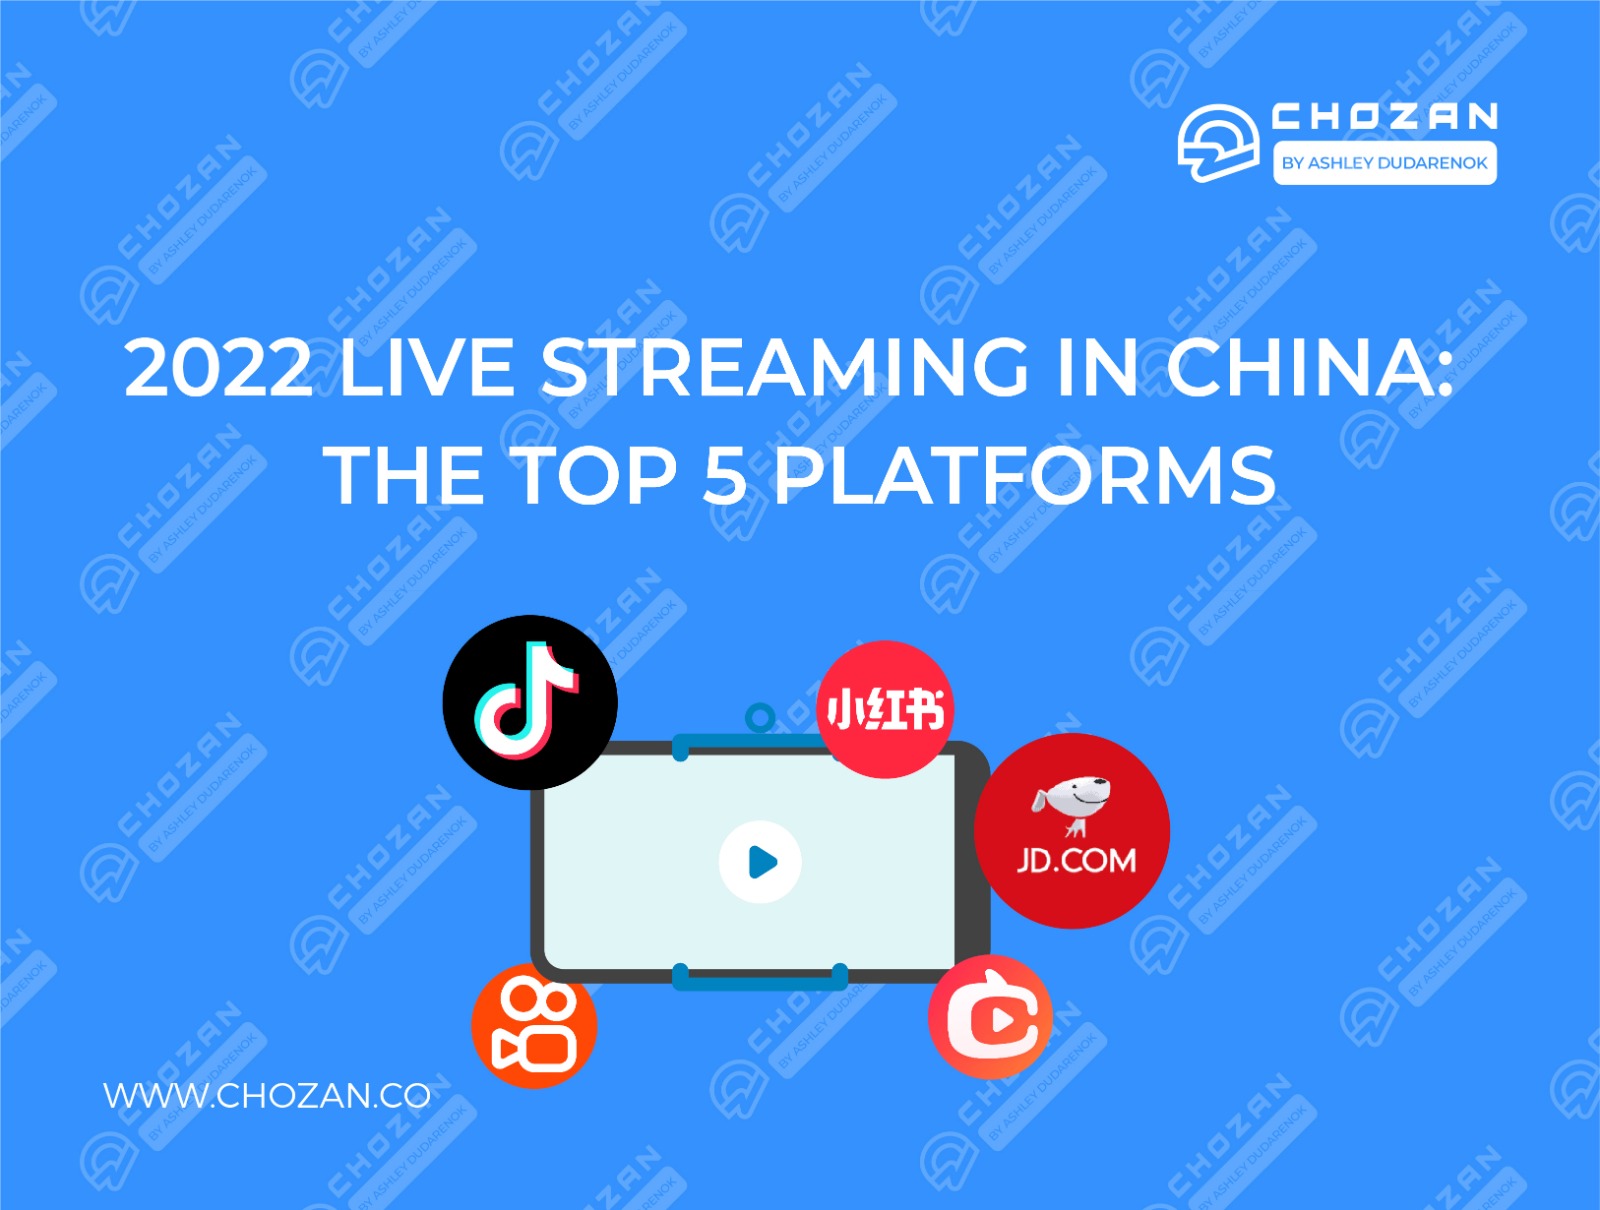 2022 Live Streaming in China: The Top 5 Platforms